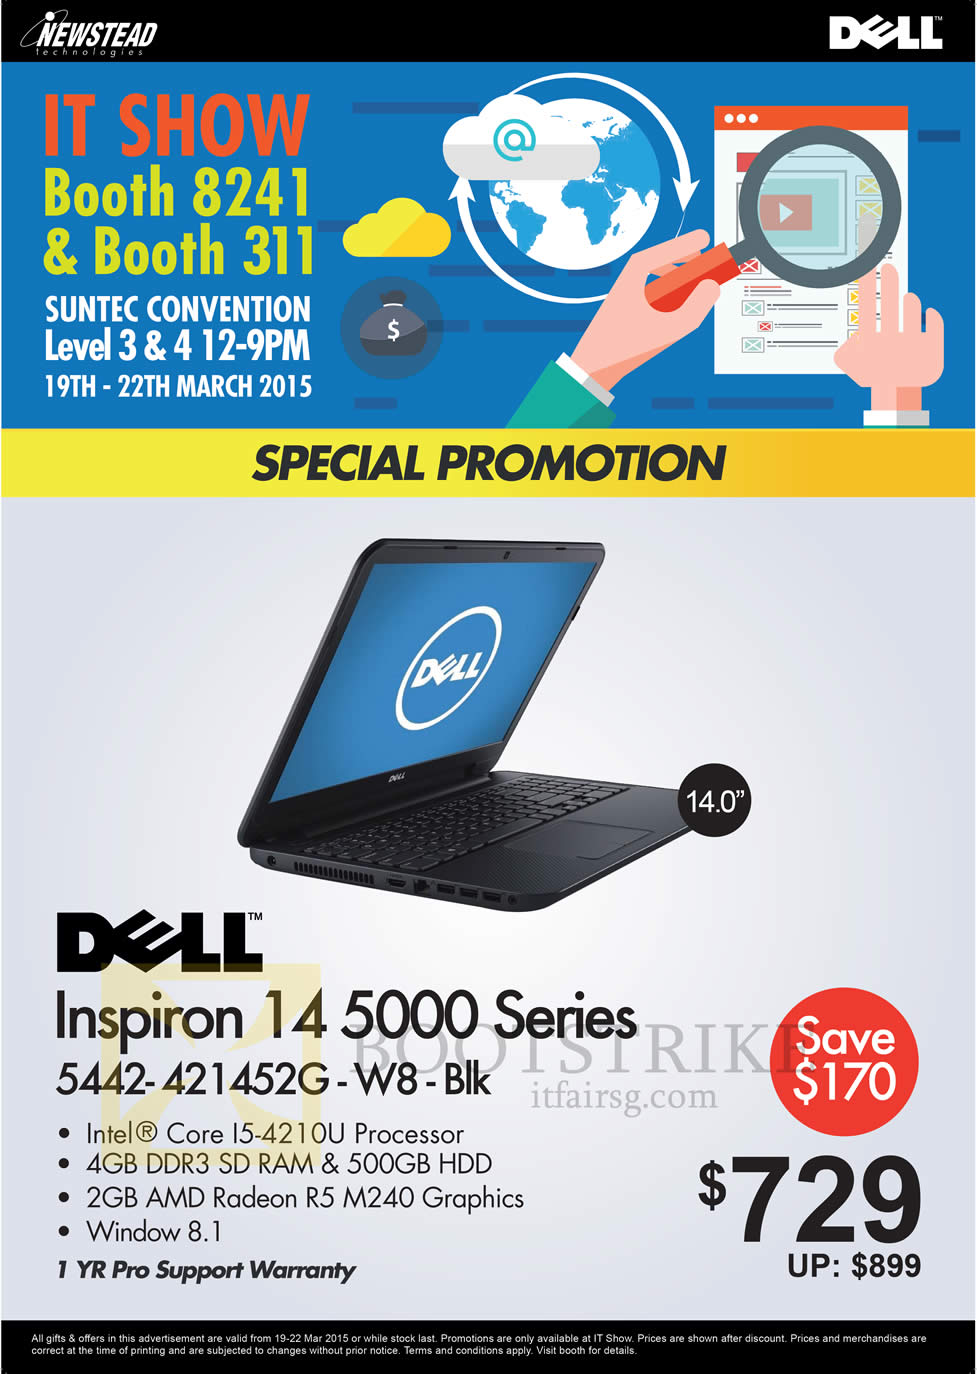 IT SHOW 2015 price list image brochure of Dell Newstead Inspiron 14 5000 Series Black Notebook